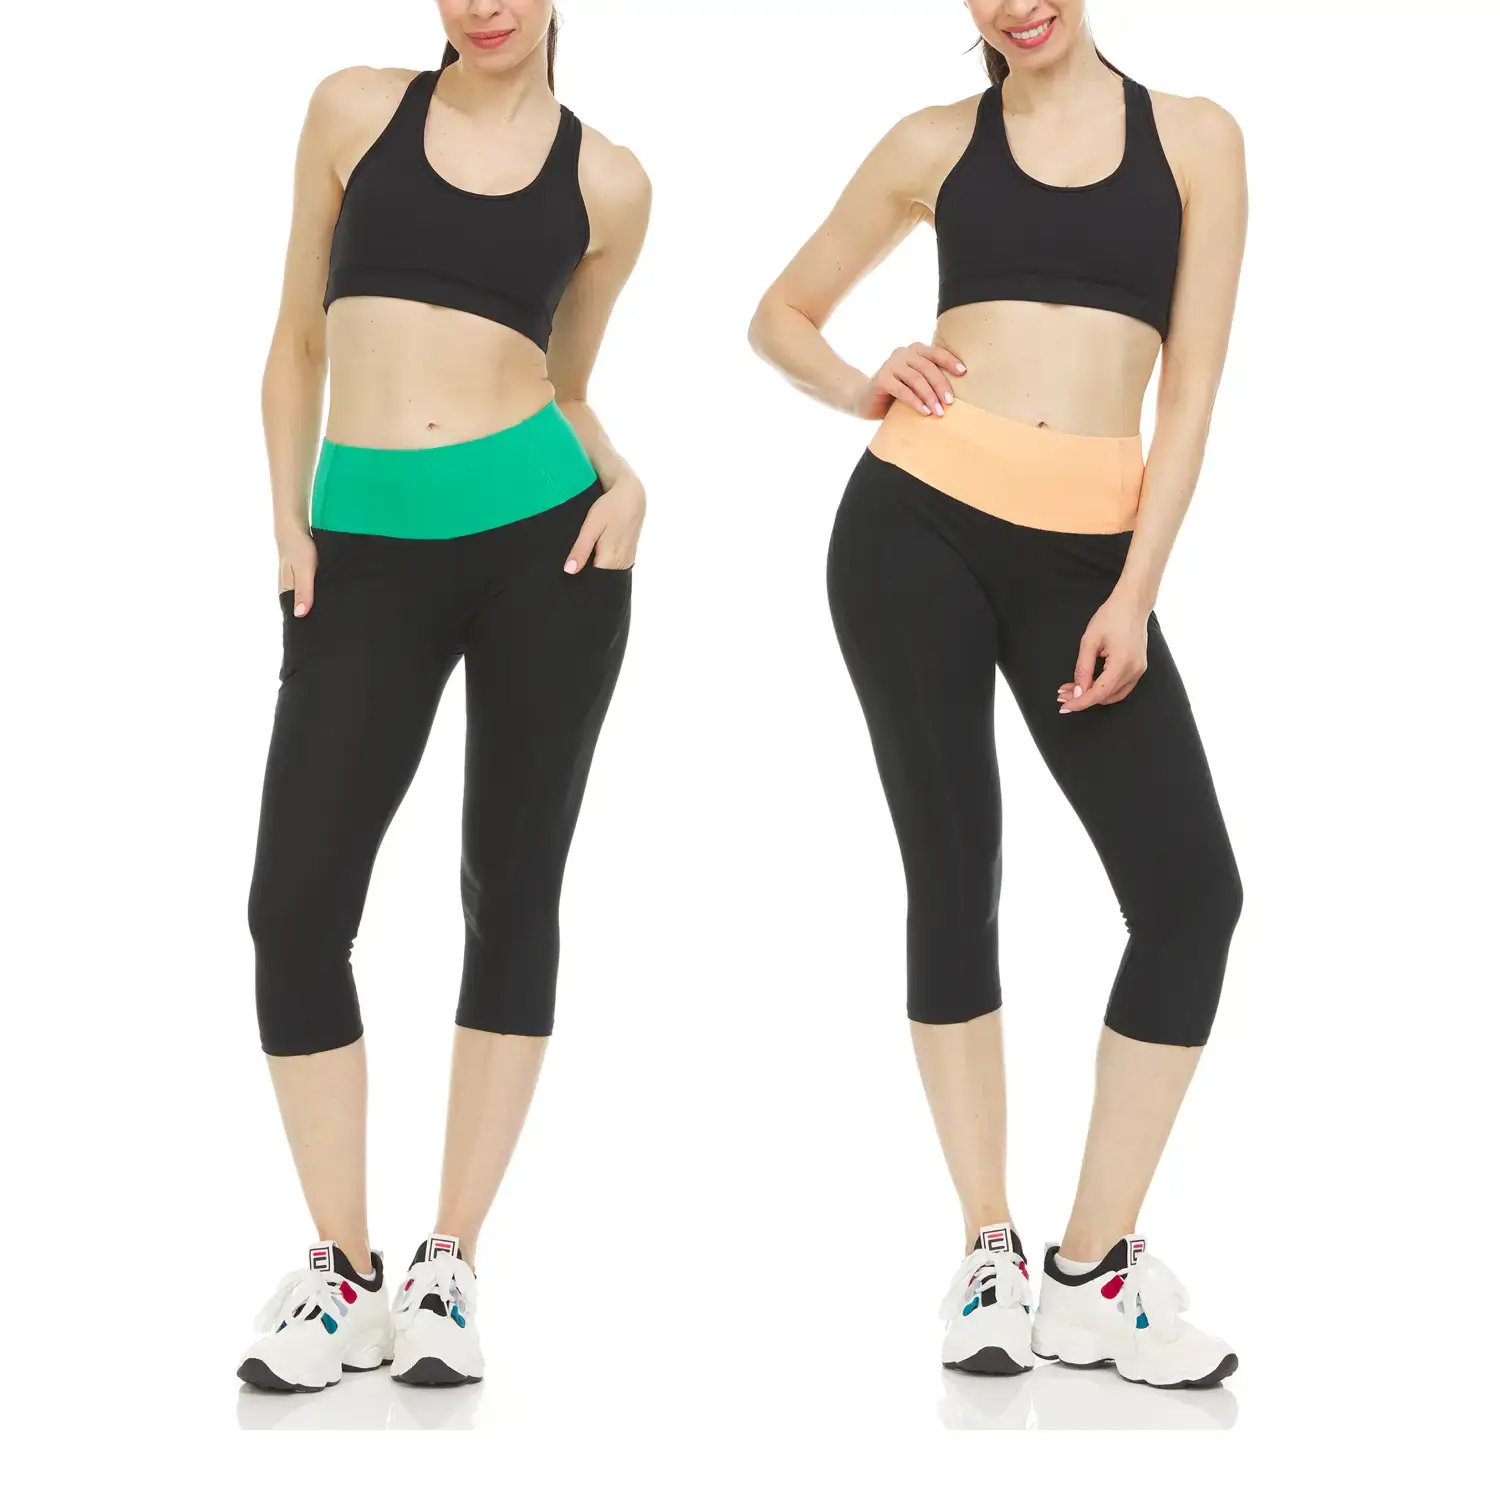 Women's Active Performance Yoga Stretch Capri Leggings Available in 2 Pack